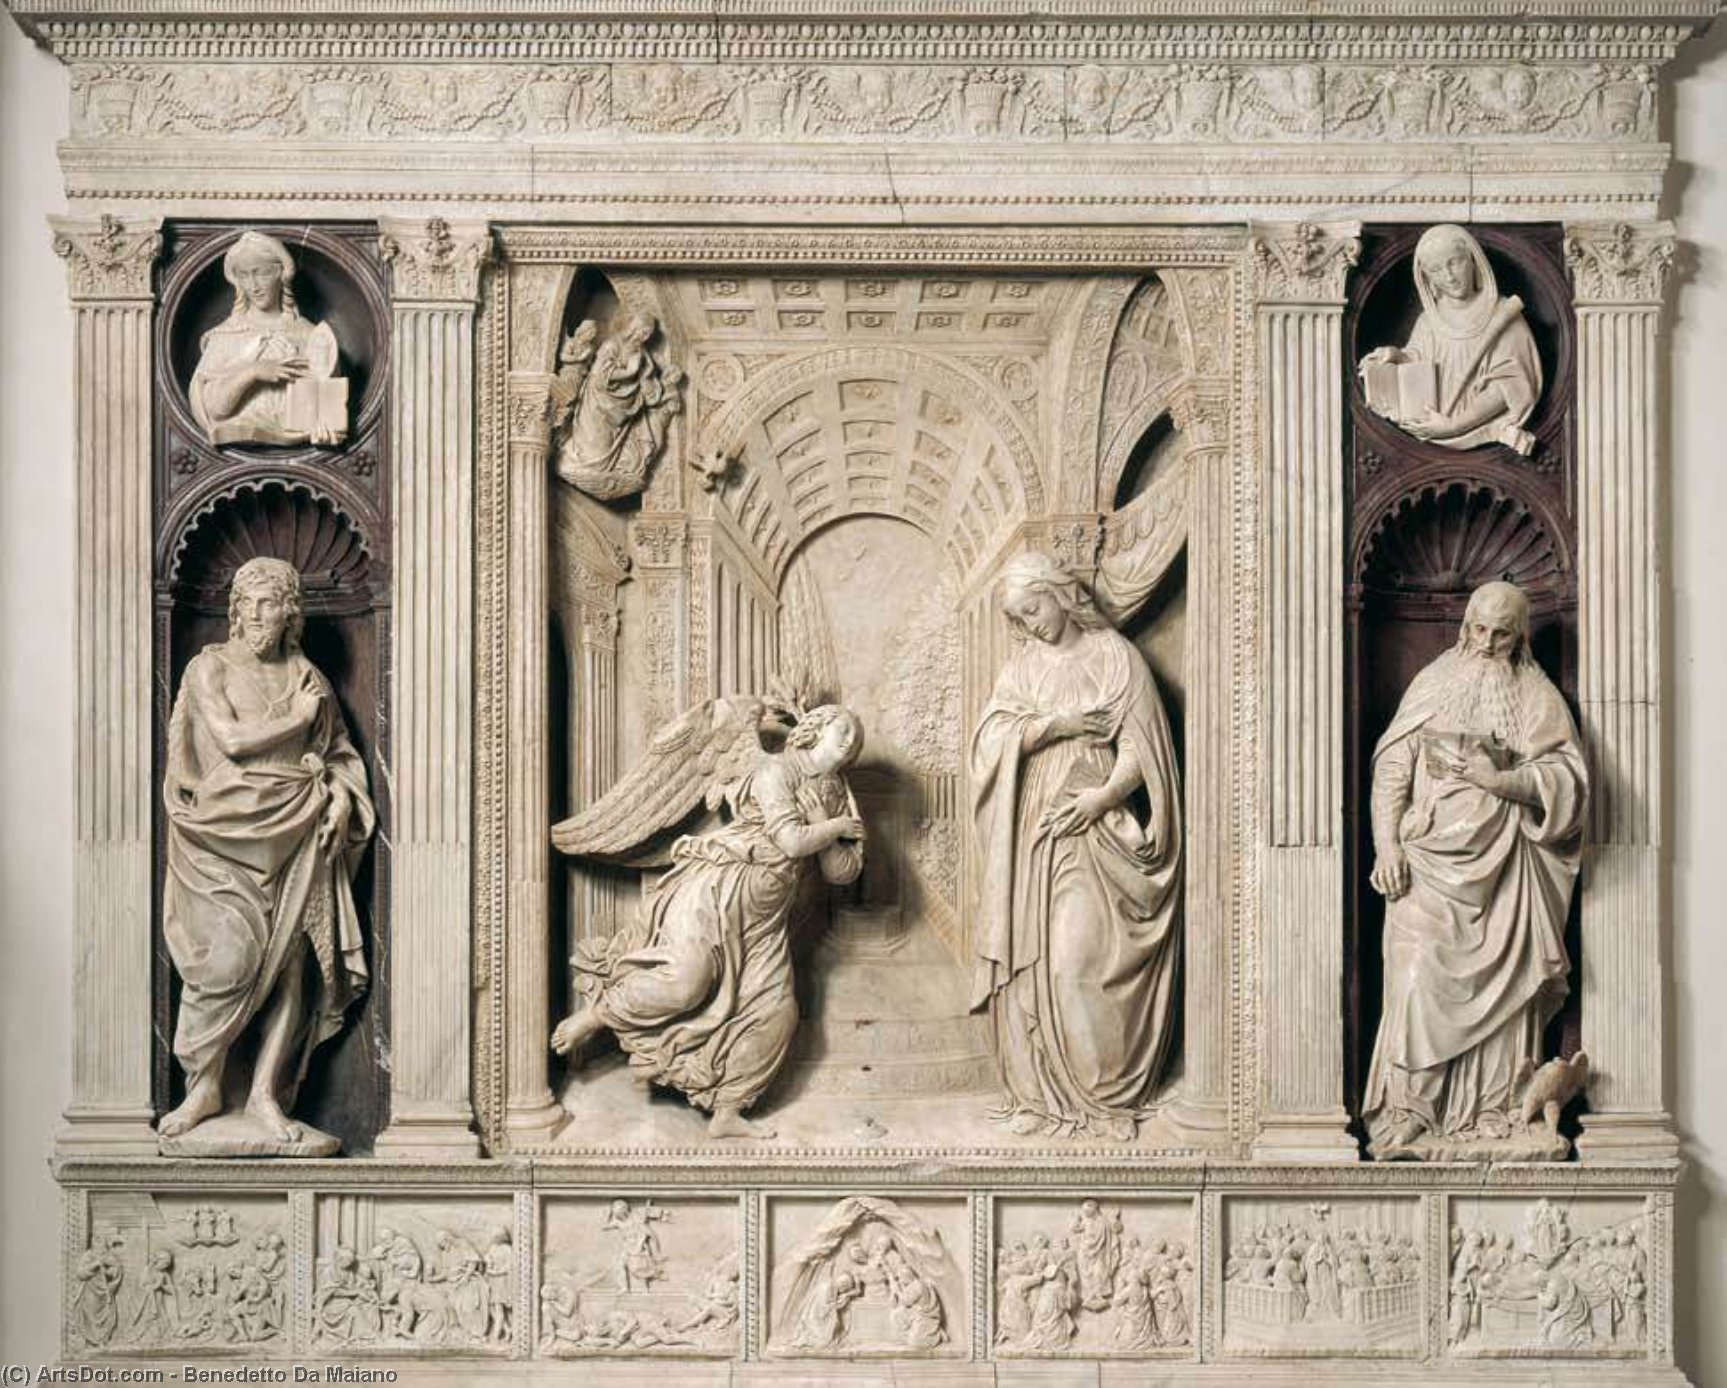 WikiOO.org - 백과 사전 - 회화, 삽화 Benedetto Da Maiano - Altarpiece of the Annunciation